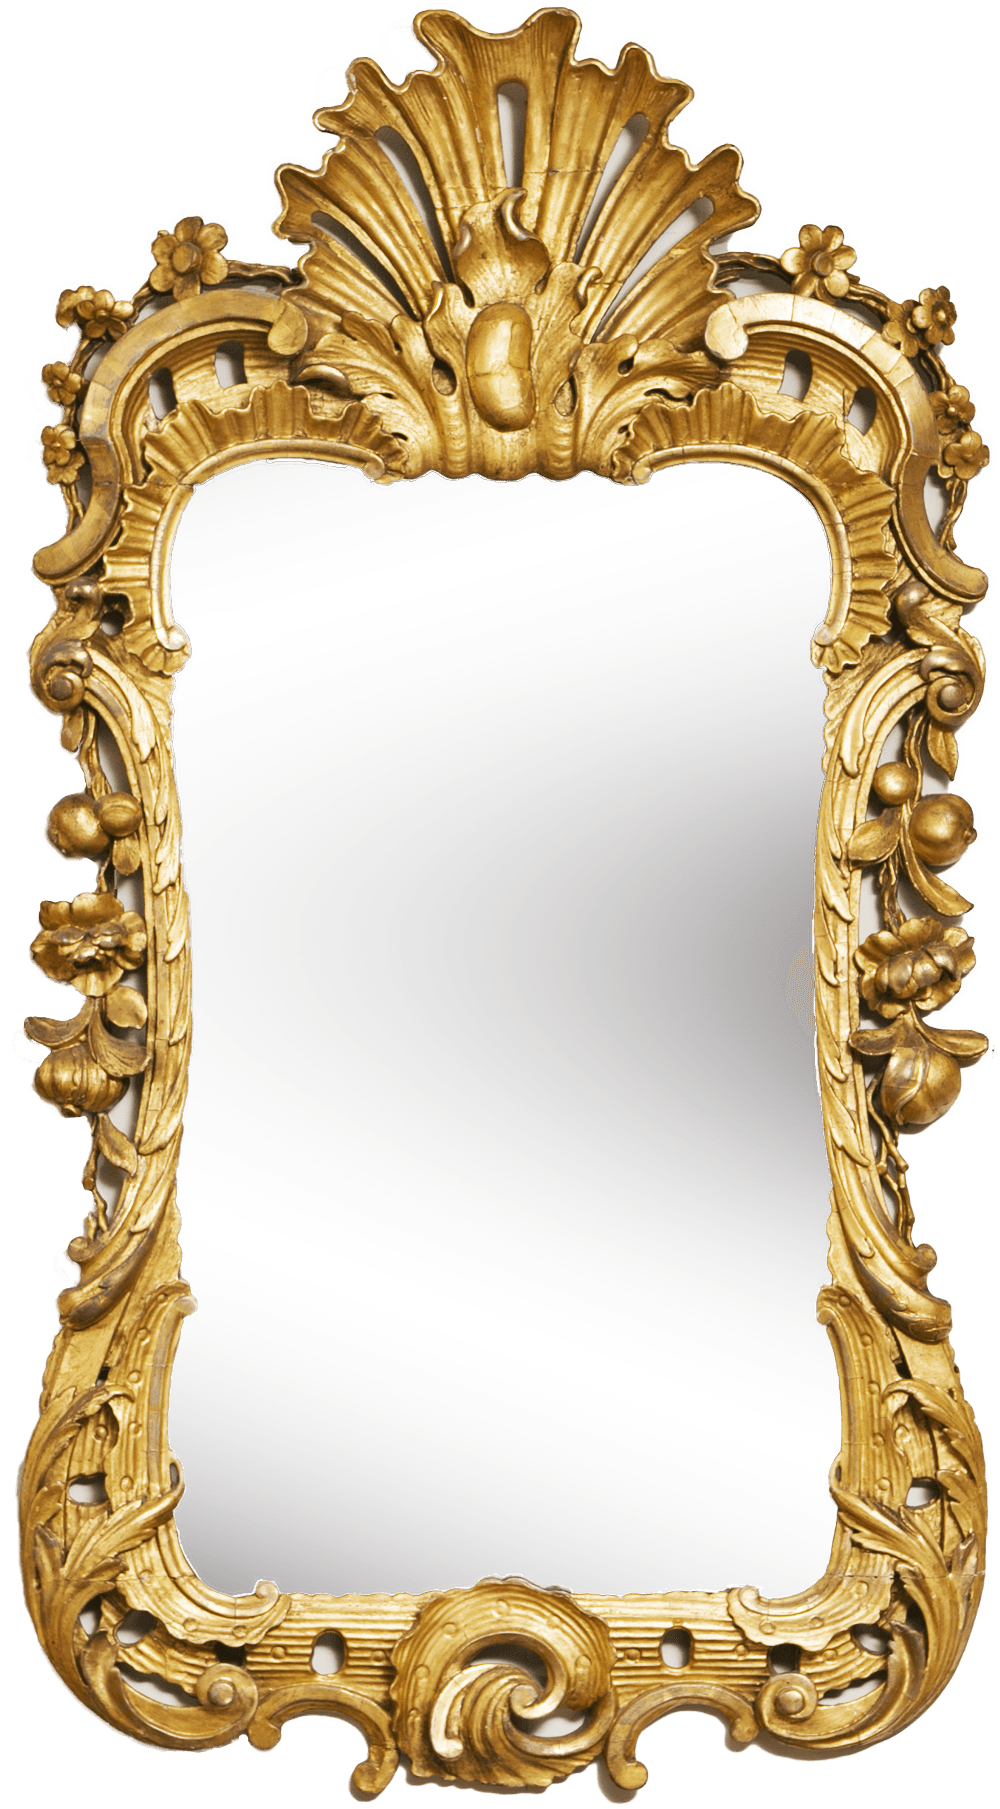 Golden Mirror Frame PNG High-Quality Image